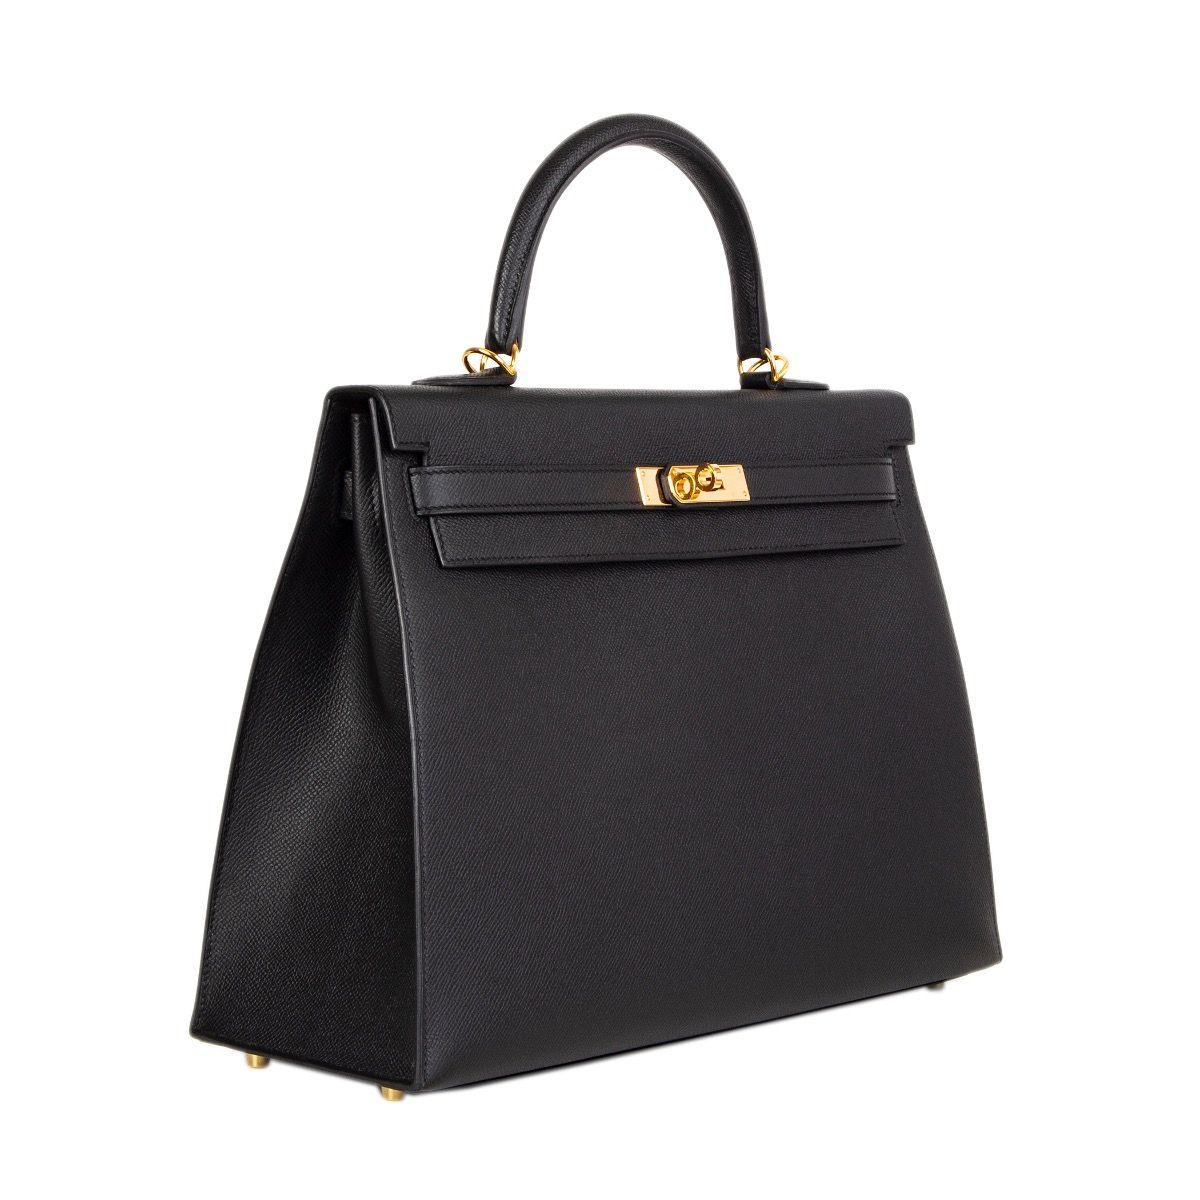 Hermes 'Kelly II 35 Sellier' in black Veau Epsom leather with gold-plated hardware. Removable shoulder strap. Closes with a turn-lock and straps on the front. Lined in Chevre (goat skin) with two open pockets against the front and a zipper pocket